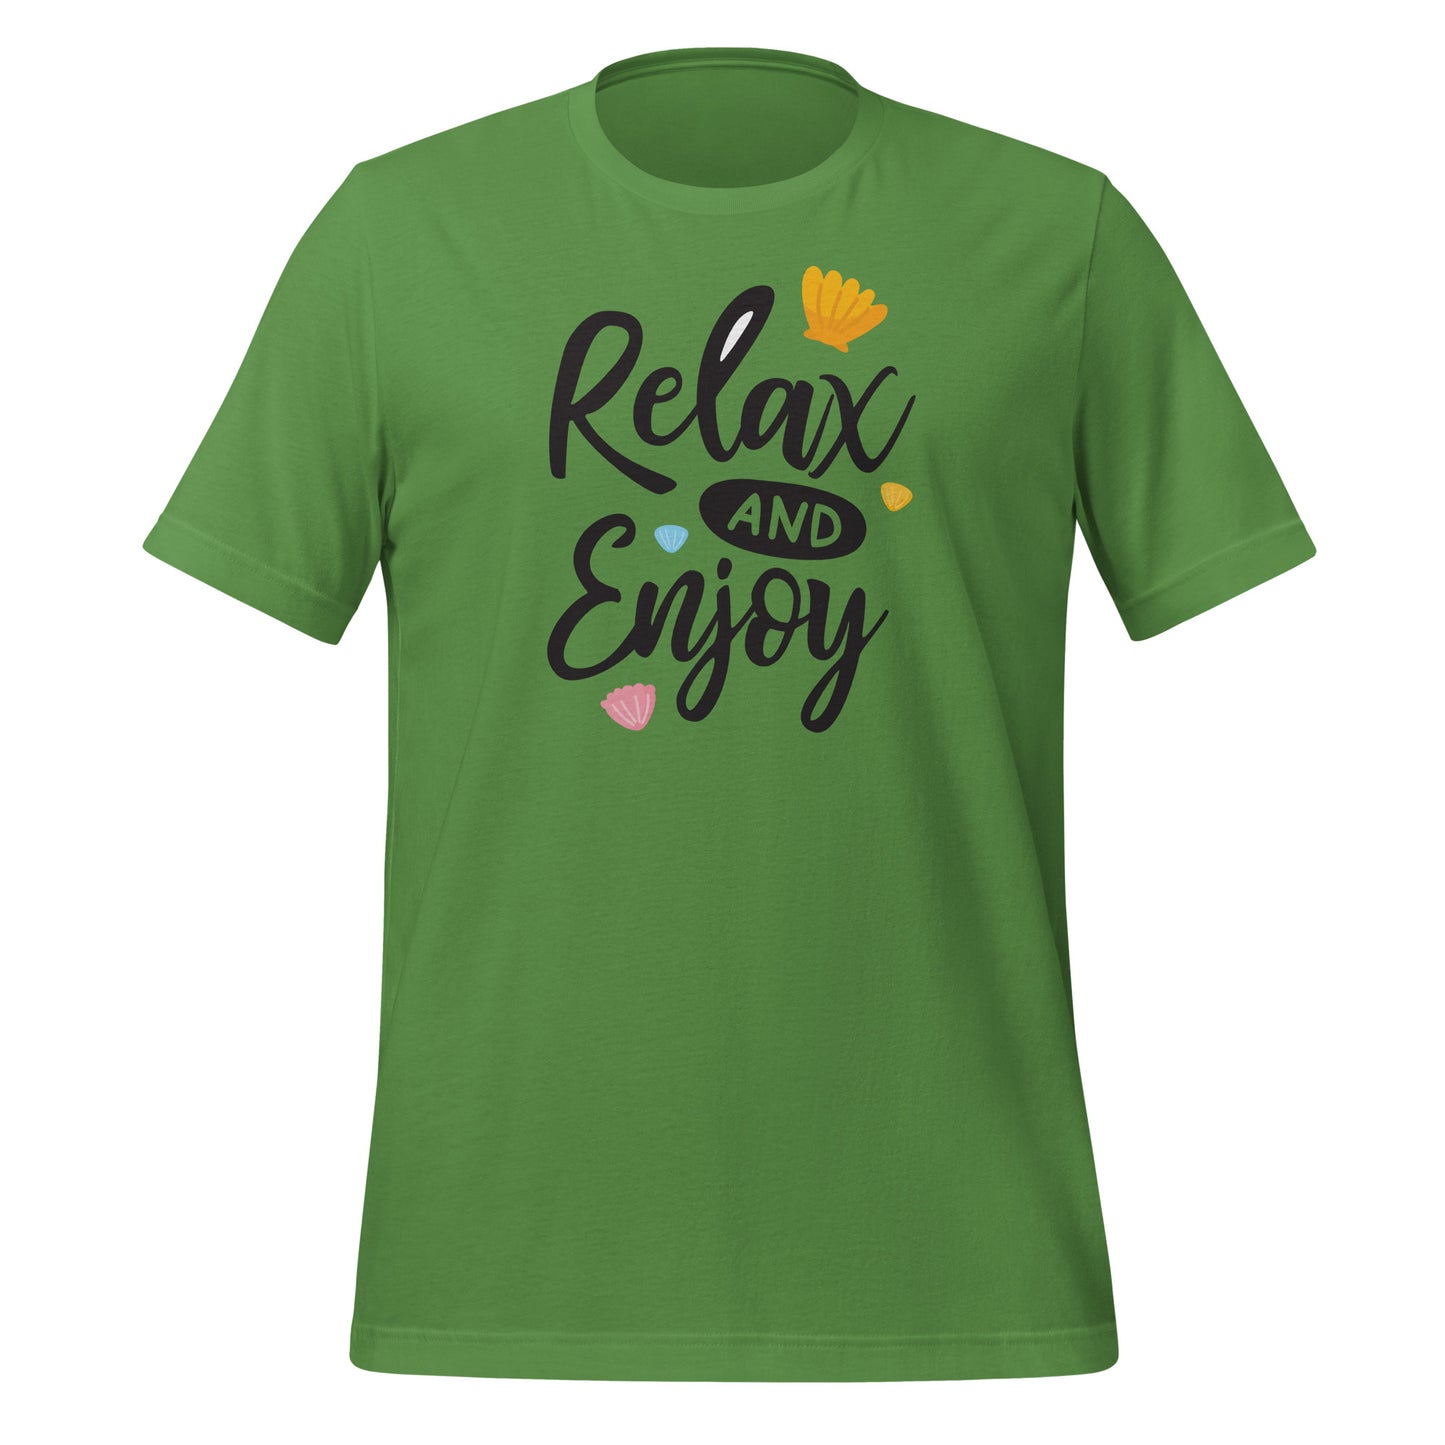 Relax and Enjoy Graphic Tee - Shop Now!